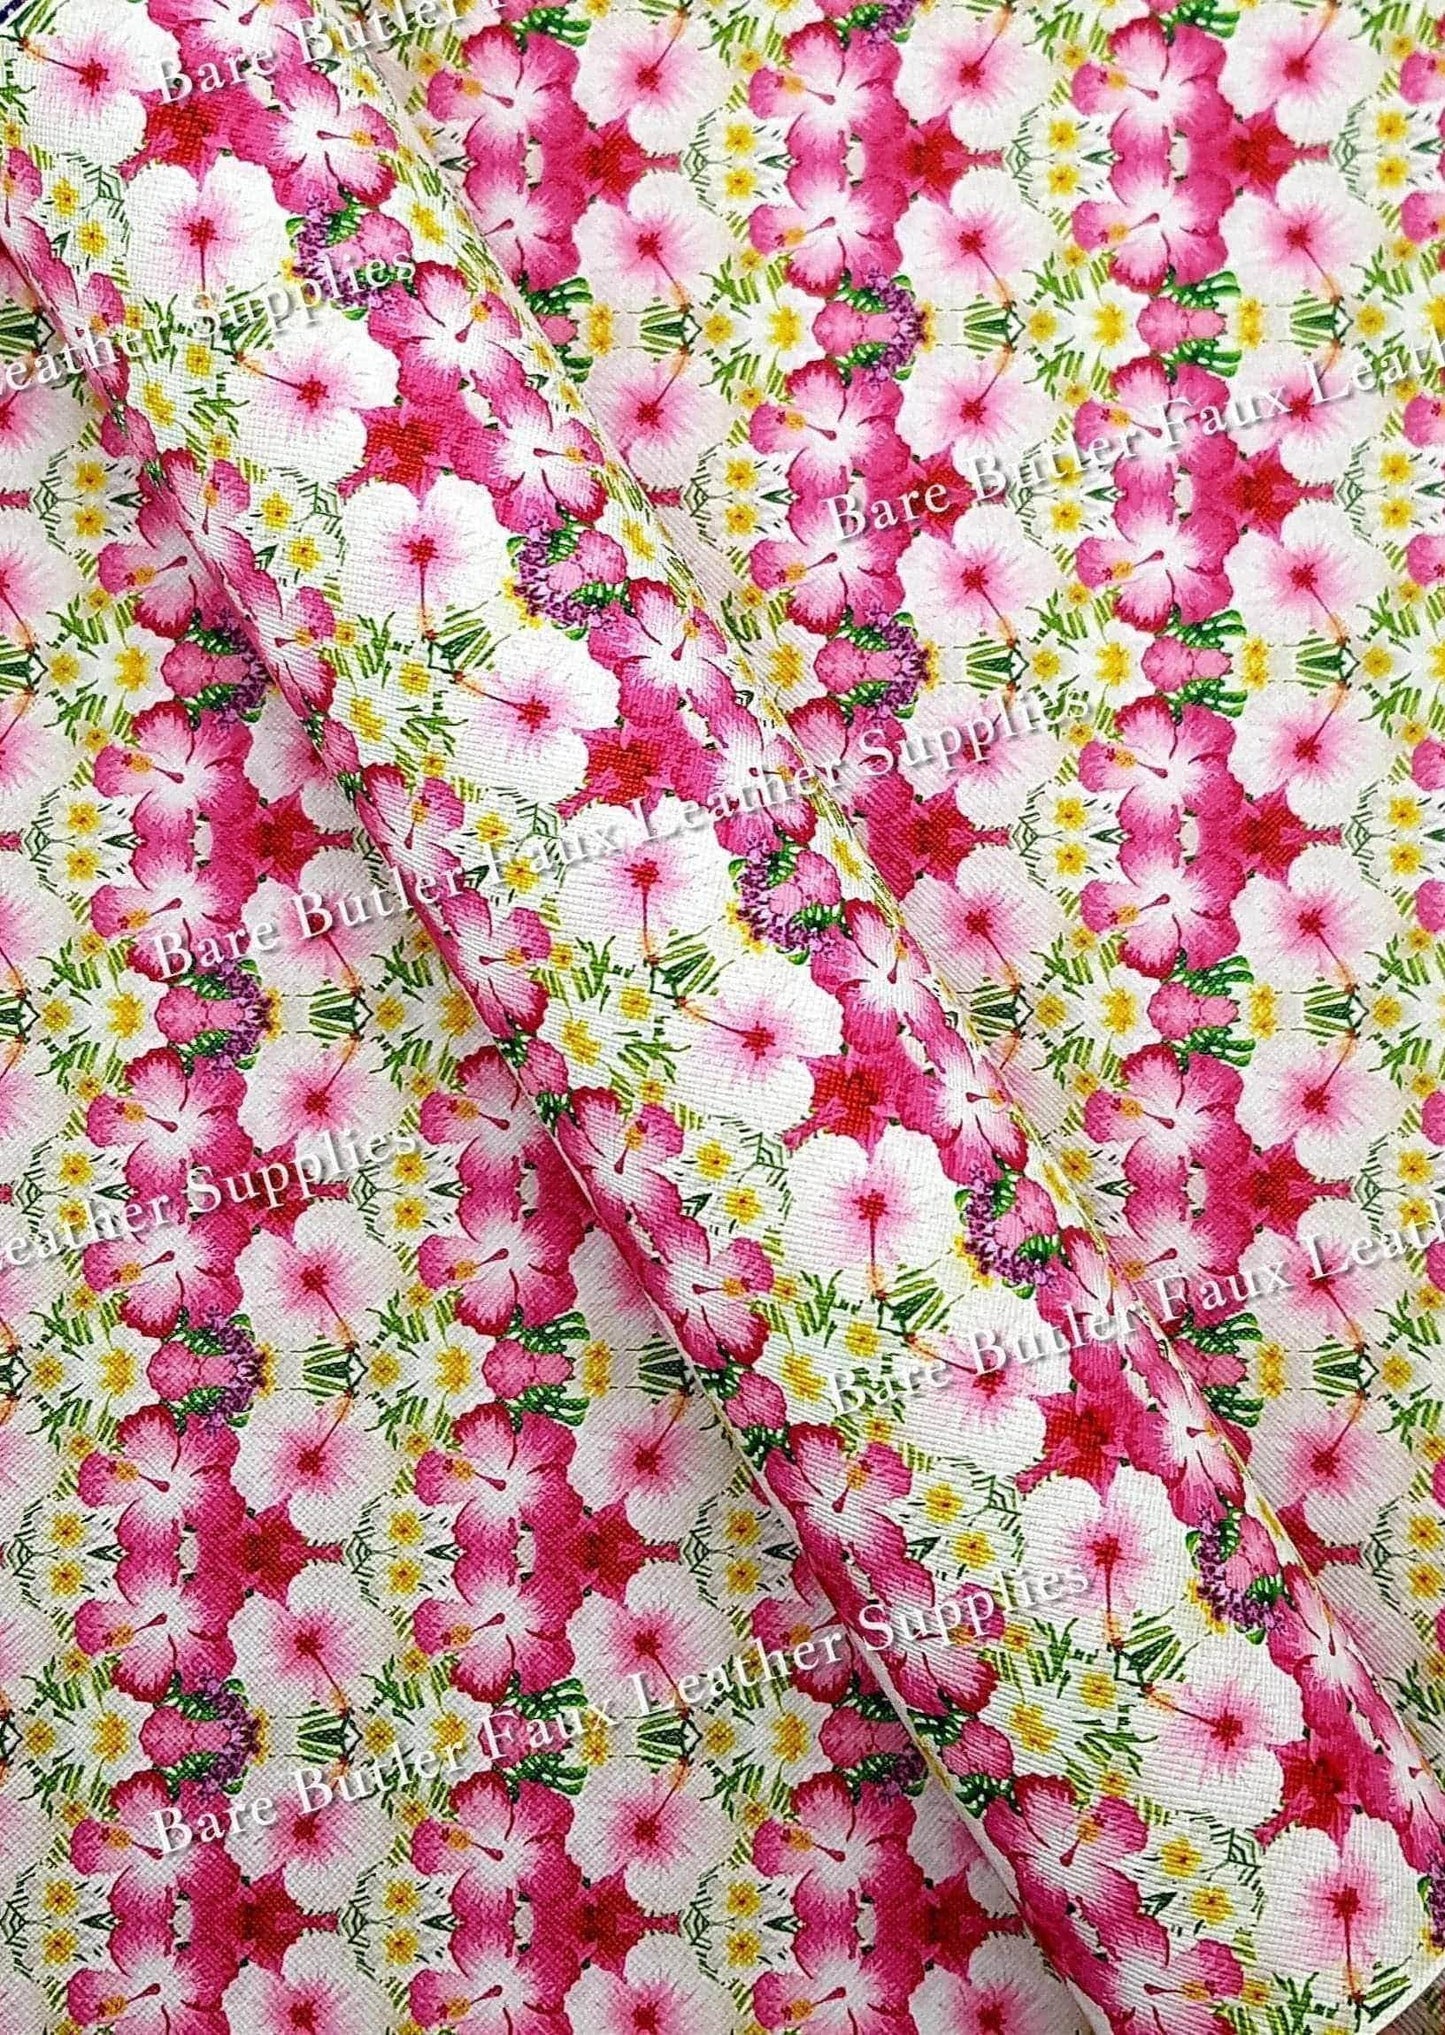 Hardy Hibiscus Faux Leather - Faux, Faux Leather, floral, Florals, flower, Flowers, Hibiscus, Leather, leatherette, Summer, tropical - Bare Butler Faux Leather Supplies 